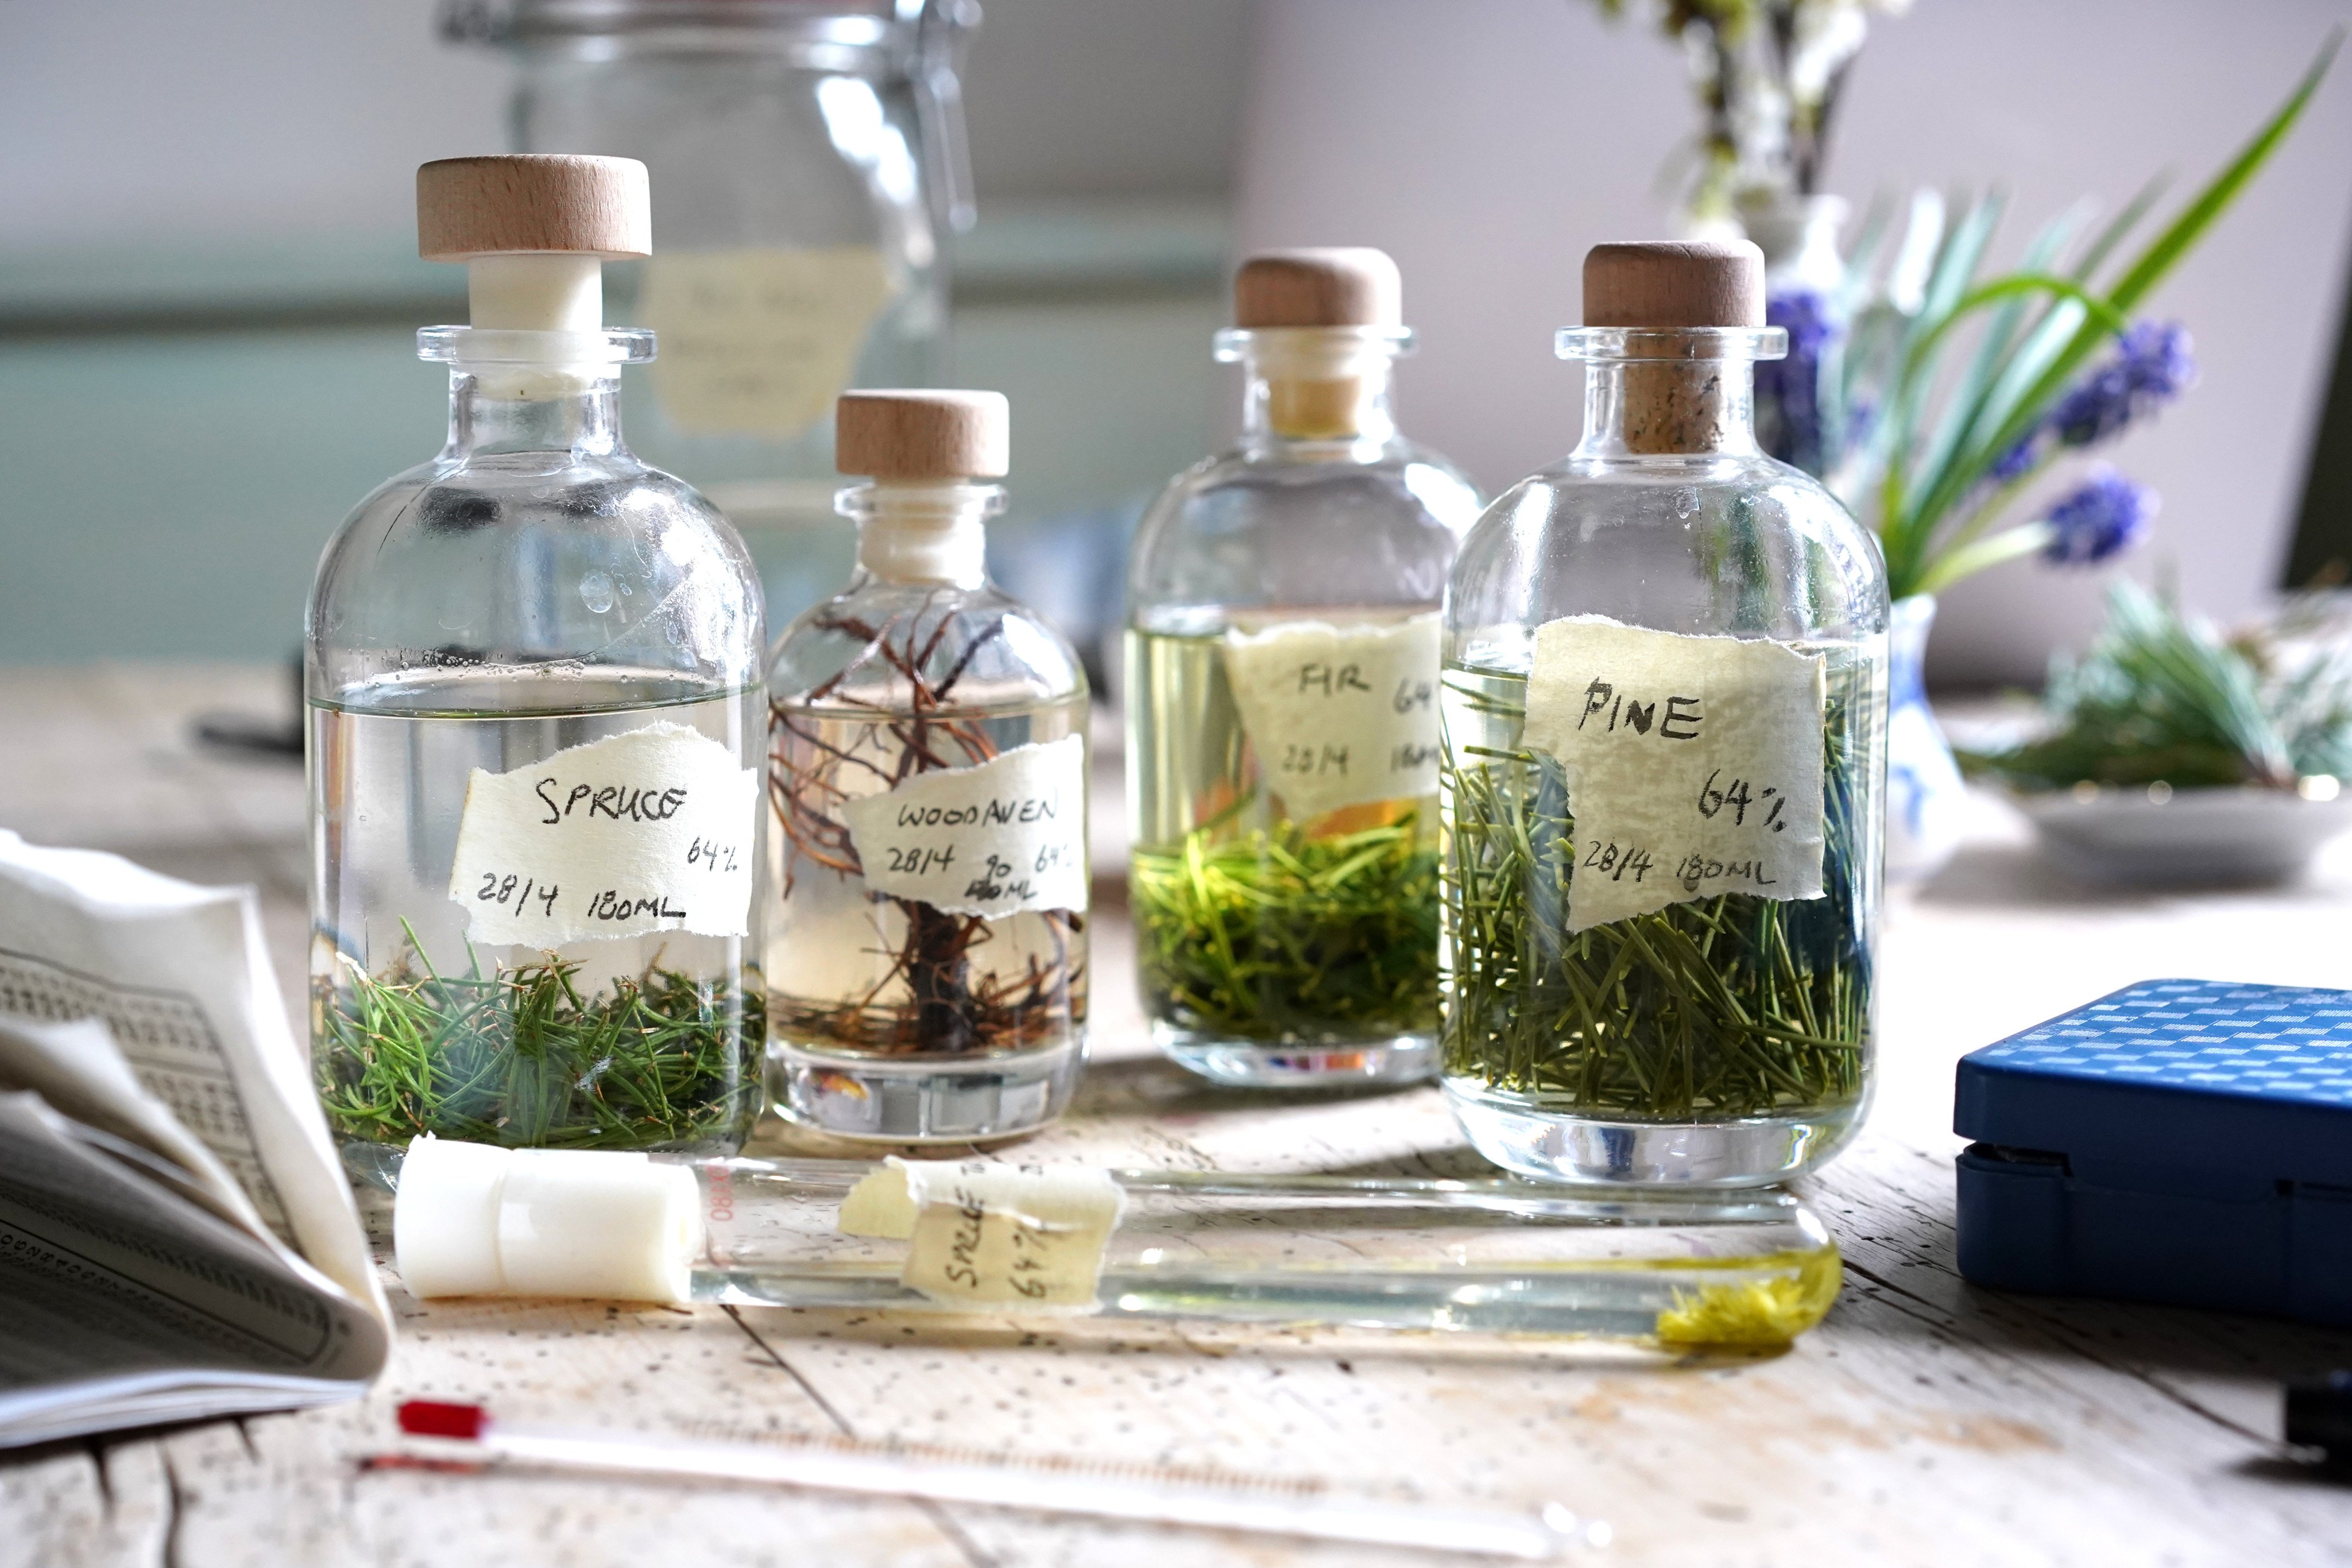 Modern gins are being created with weird botanicals and flavours, from beef to oysters and ants, and even elephant dung. Photo: Victoria Chow